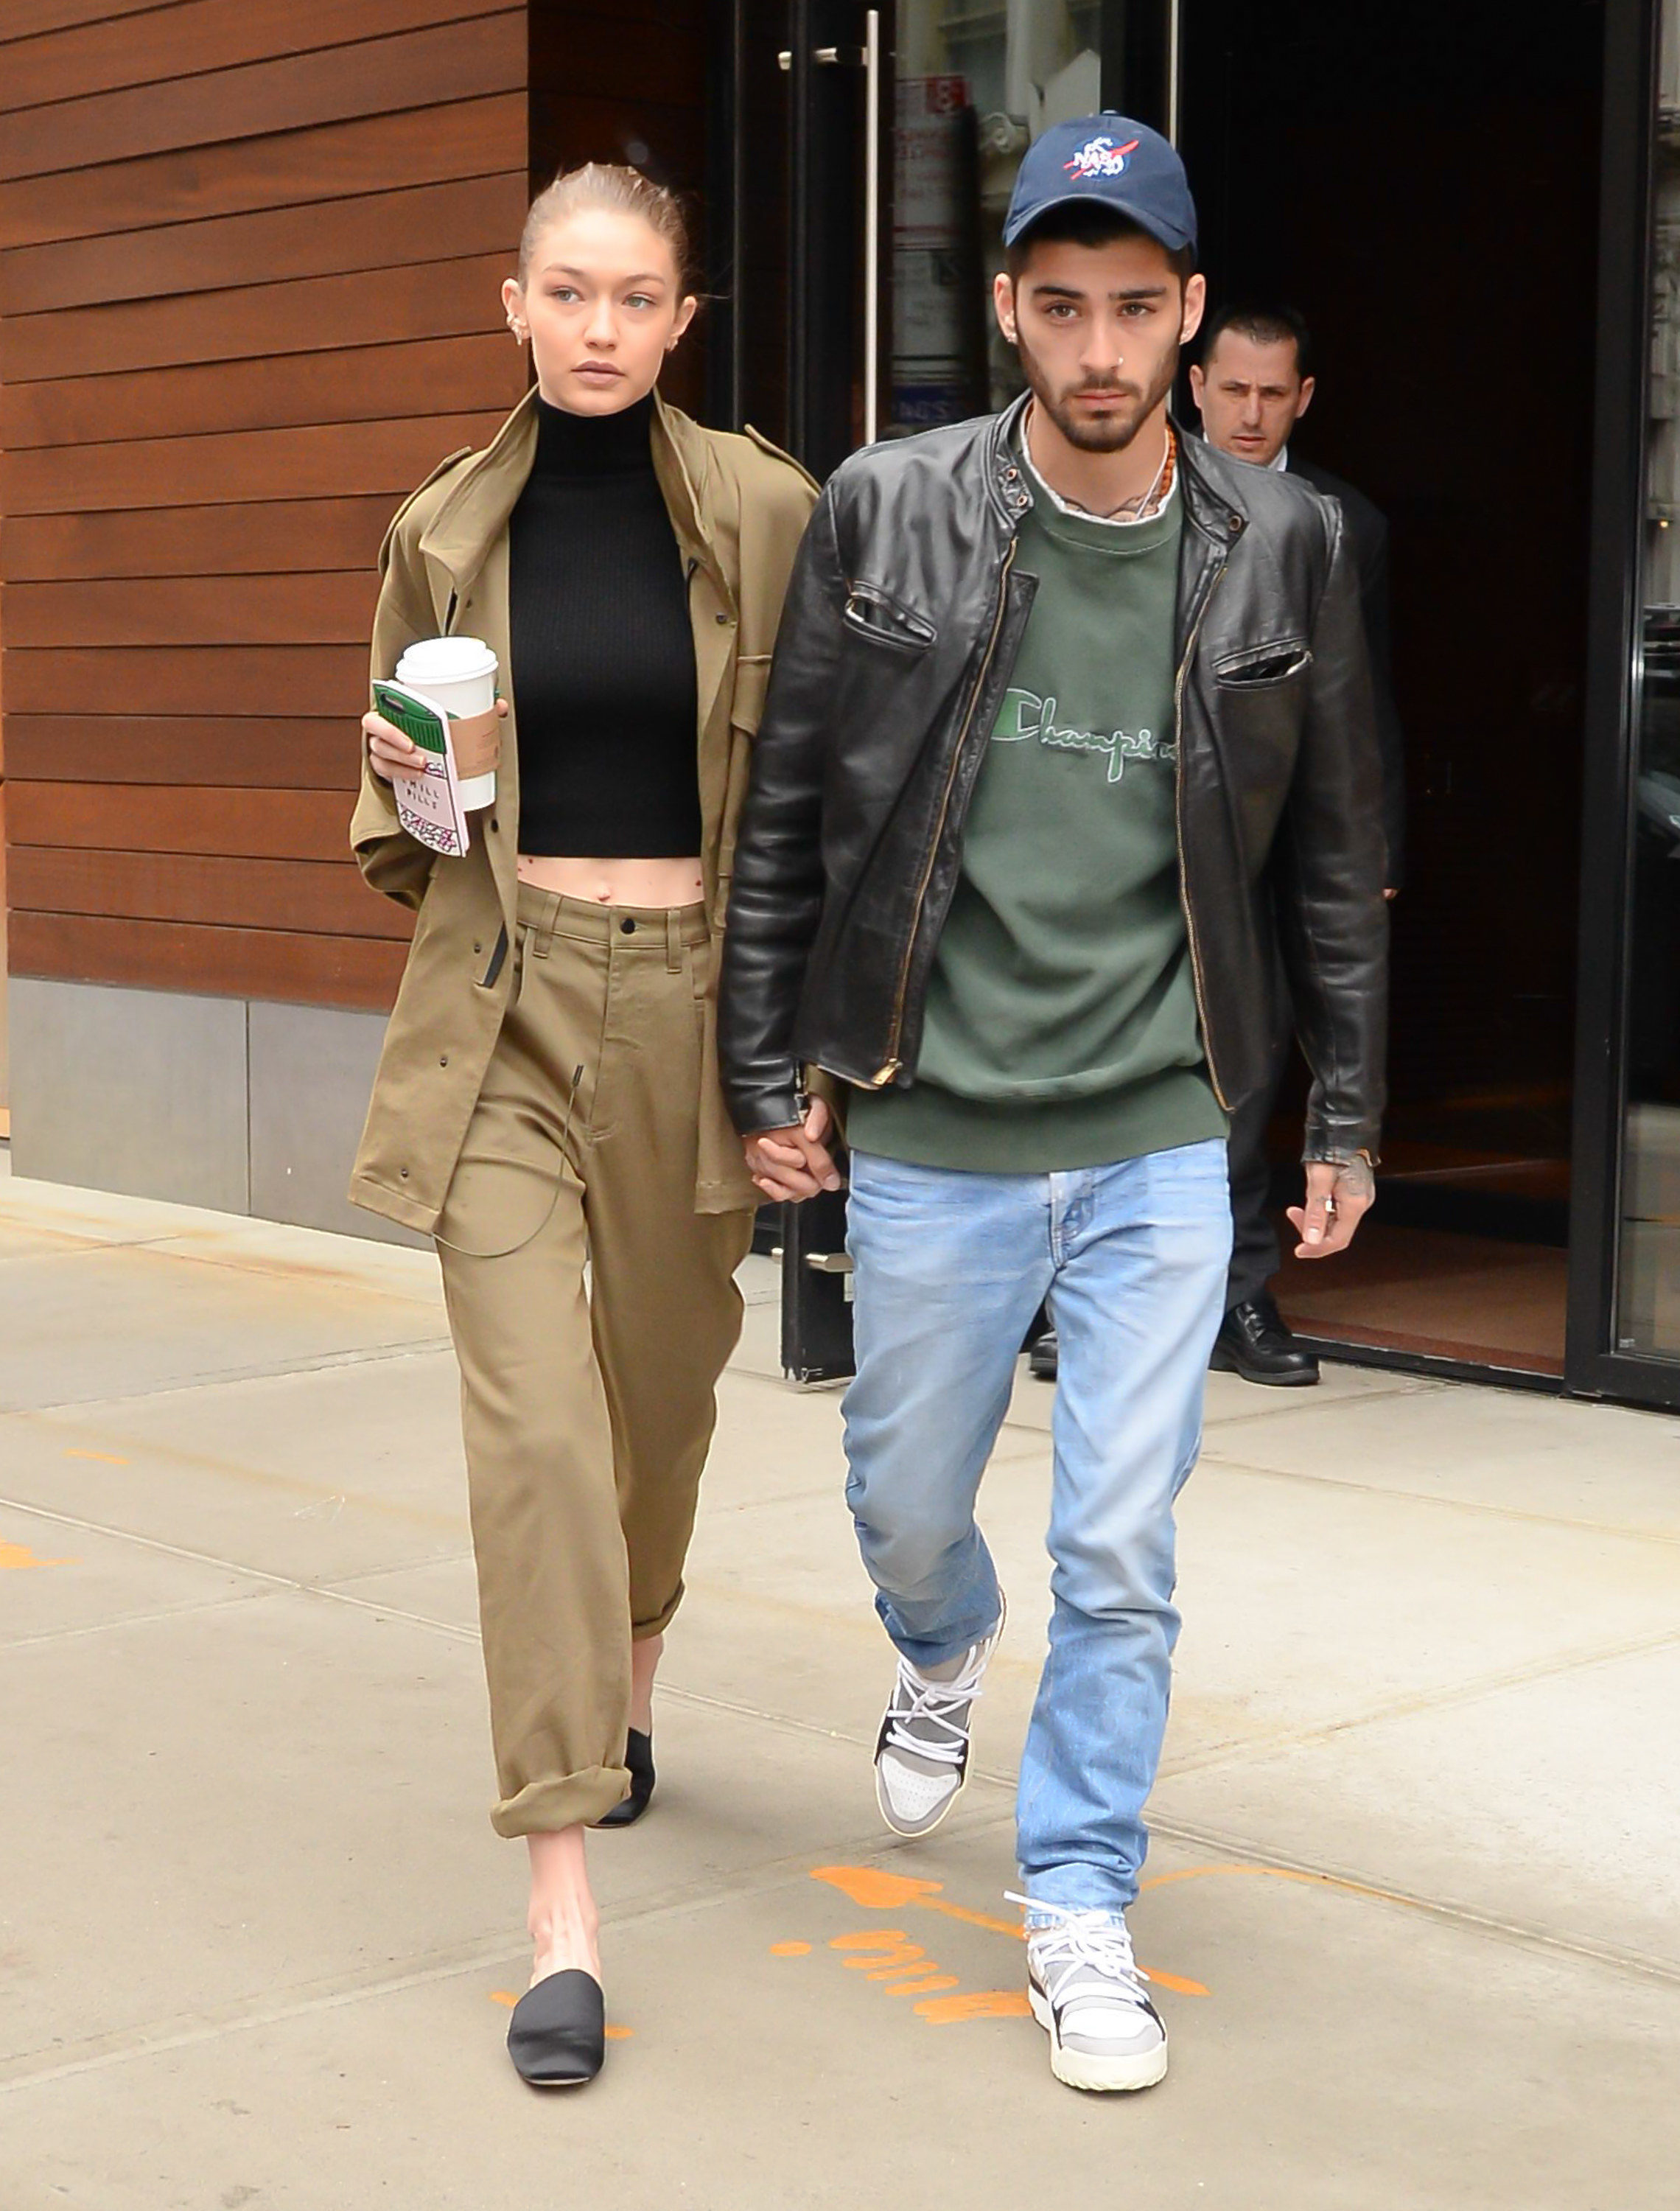 Hadid and Malik walk out of a building together